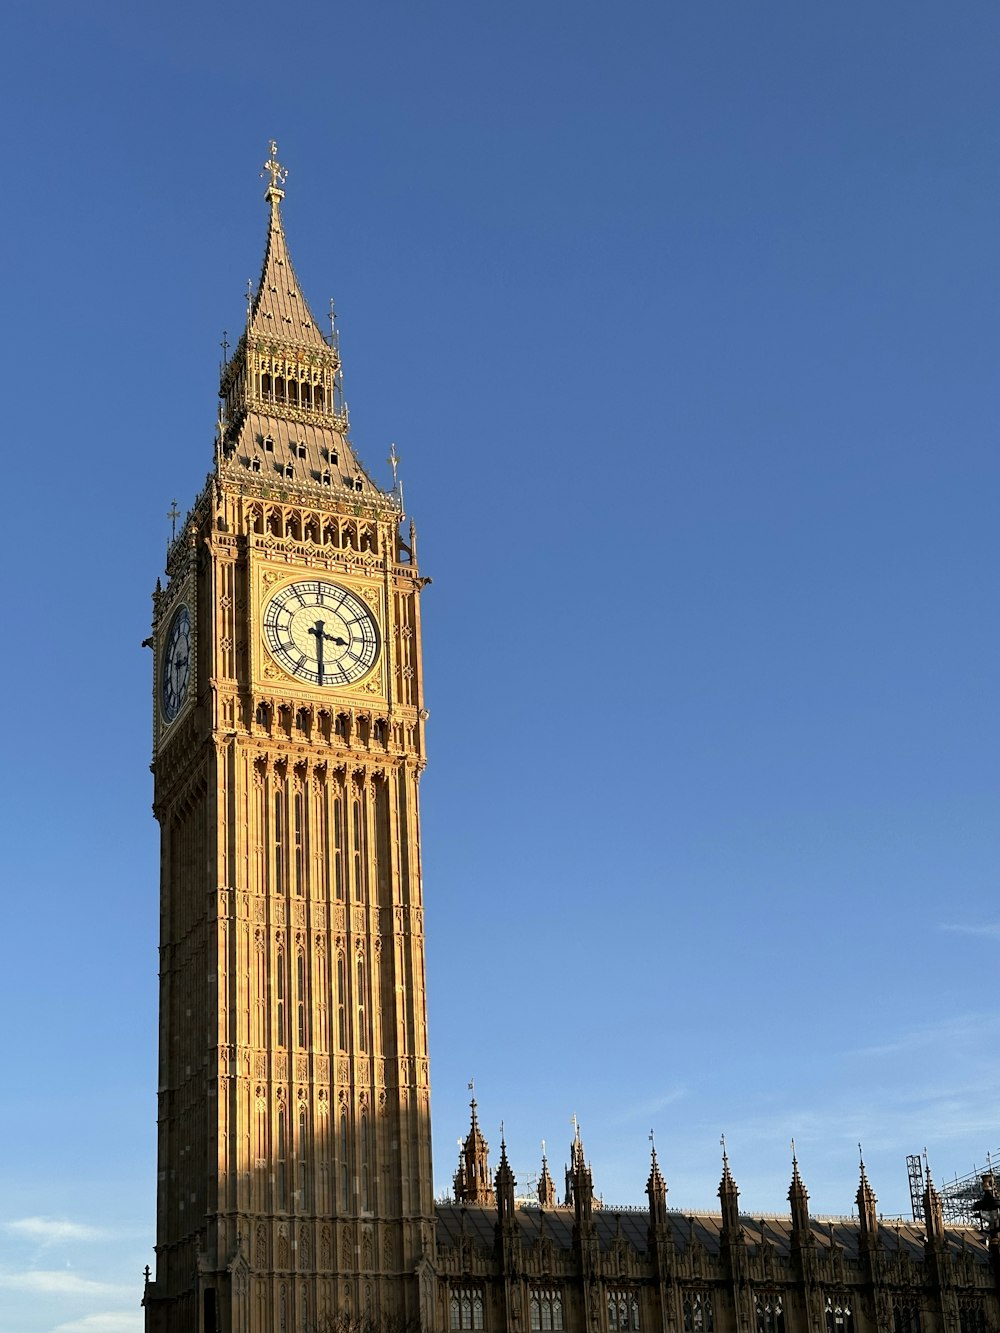 a large clock tower stands tall with Big Ben in the background